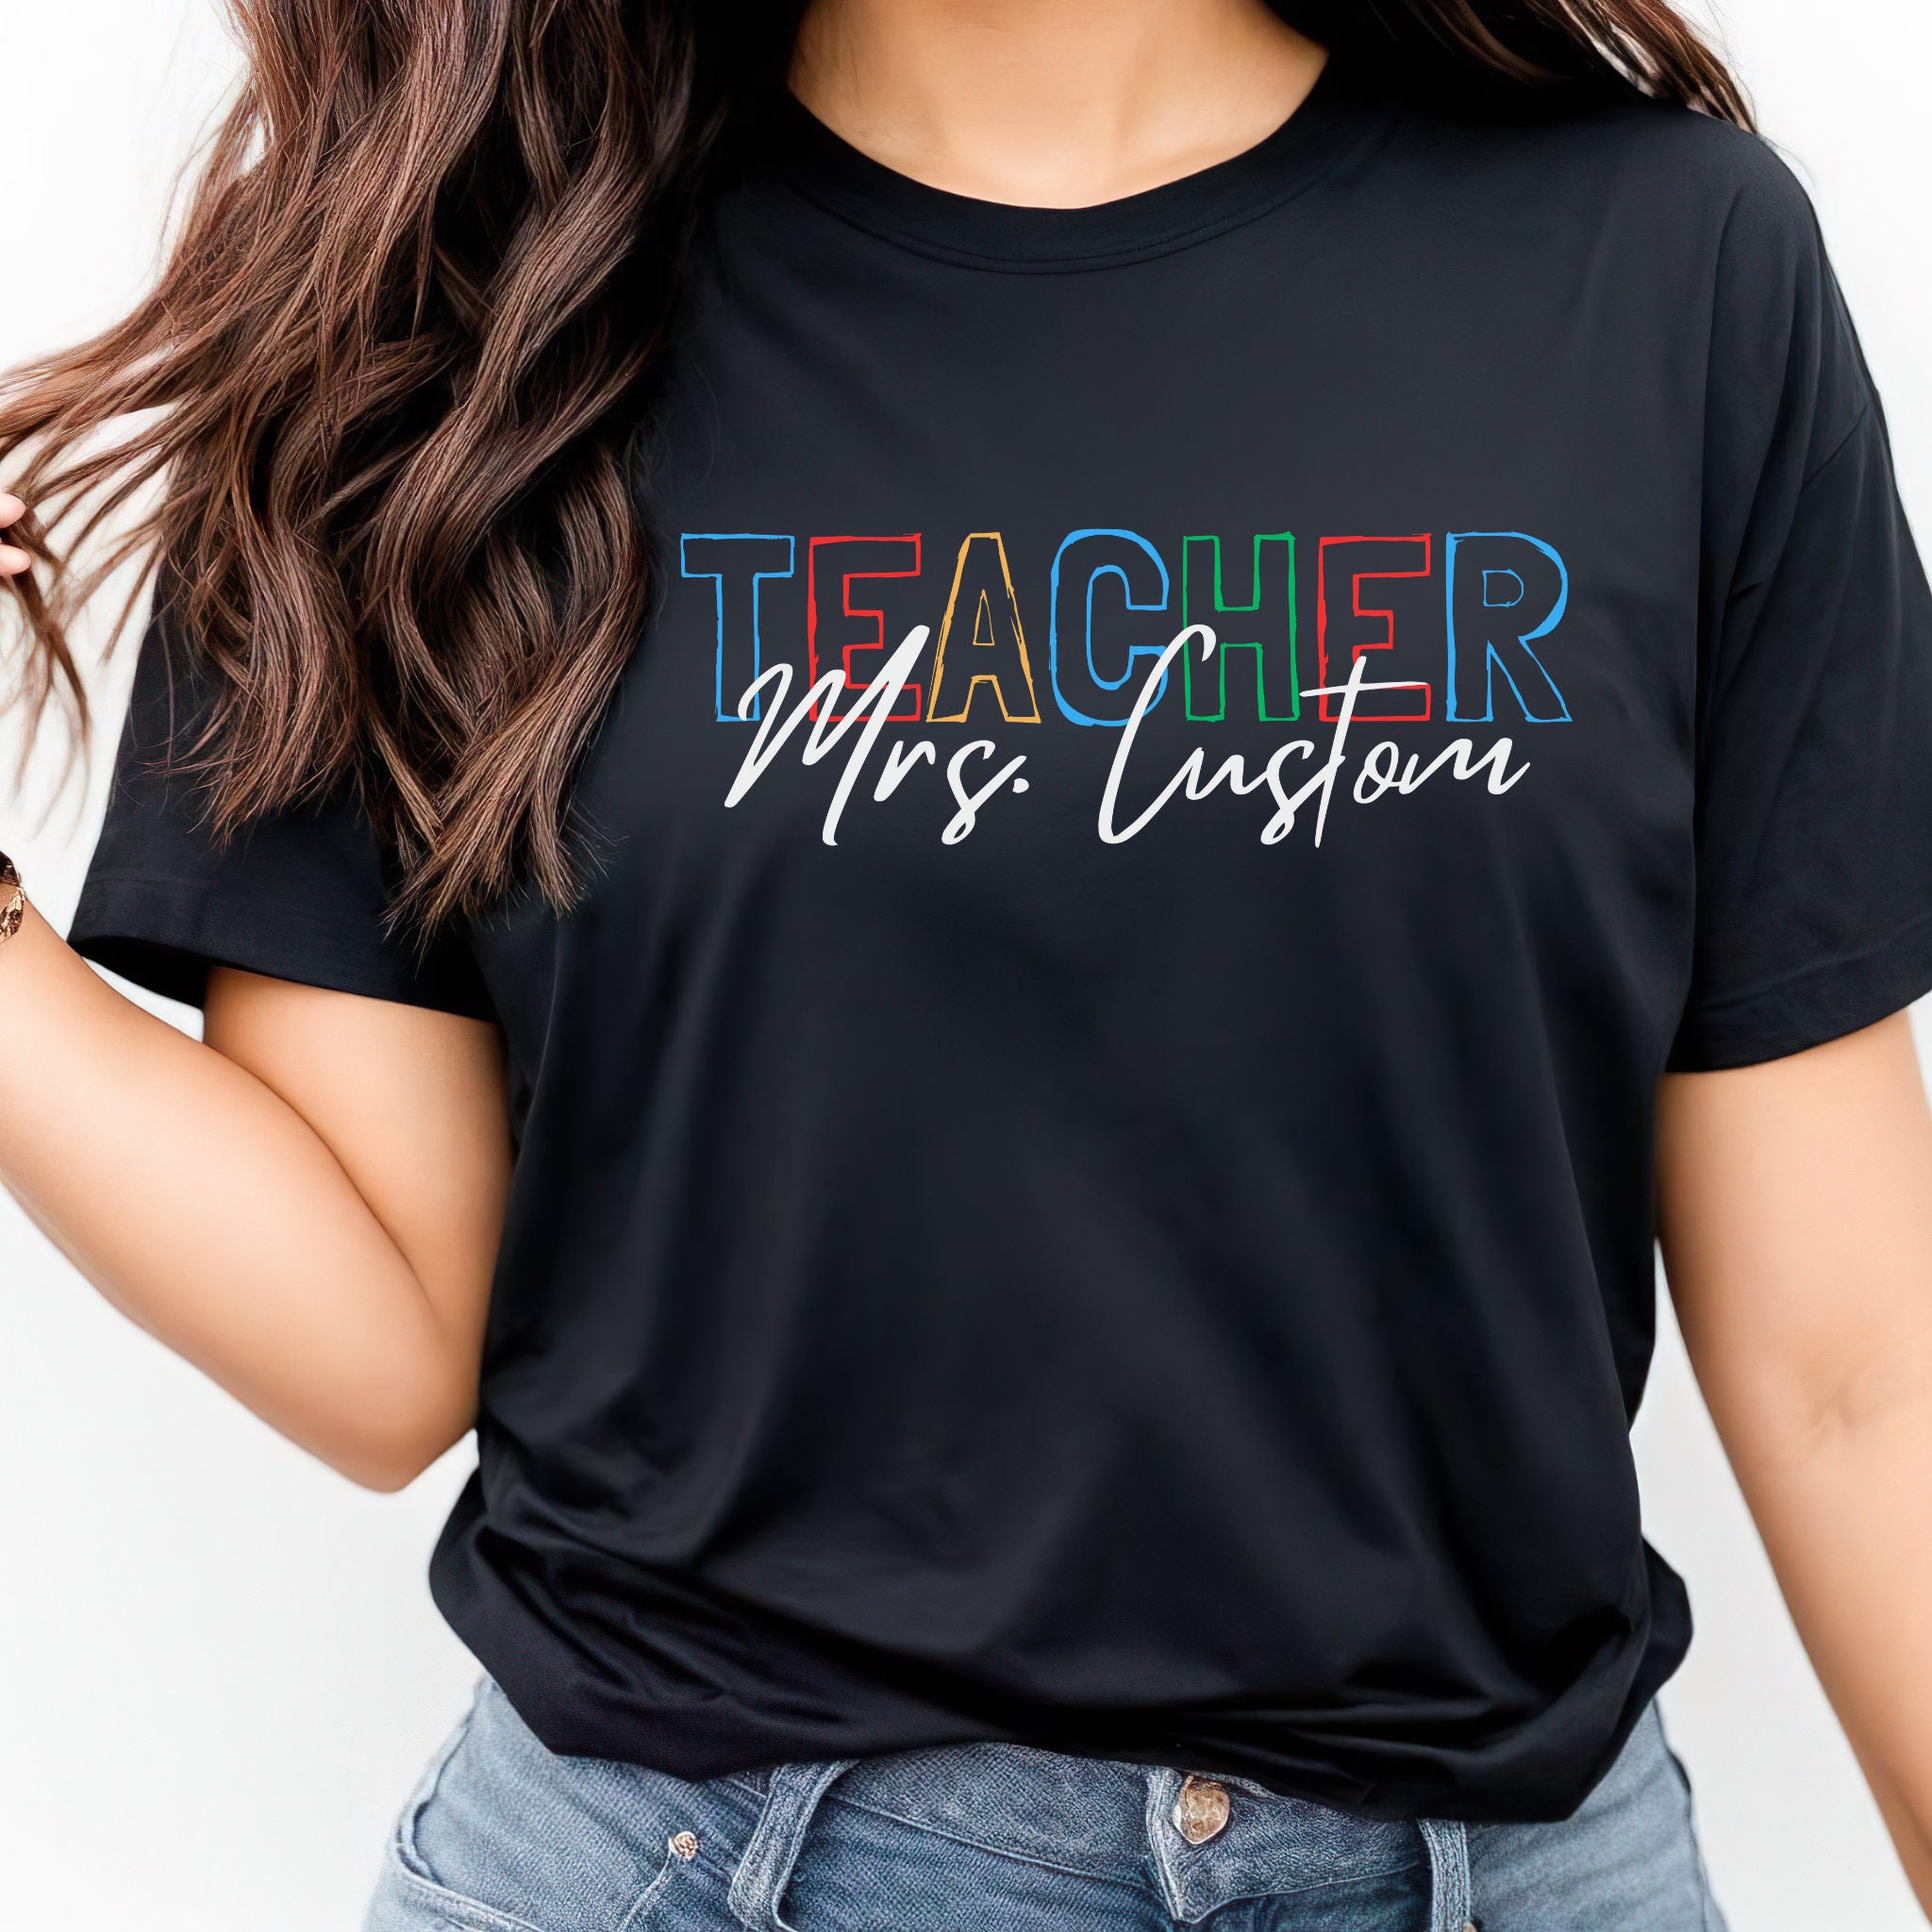 Personalized Teacher T-Shirt with Name, Gifted Teacher